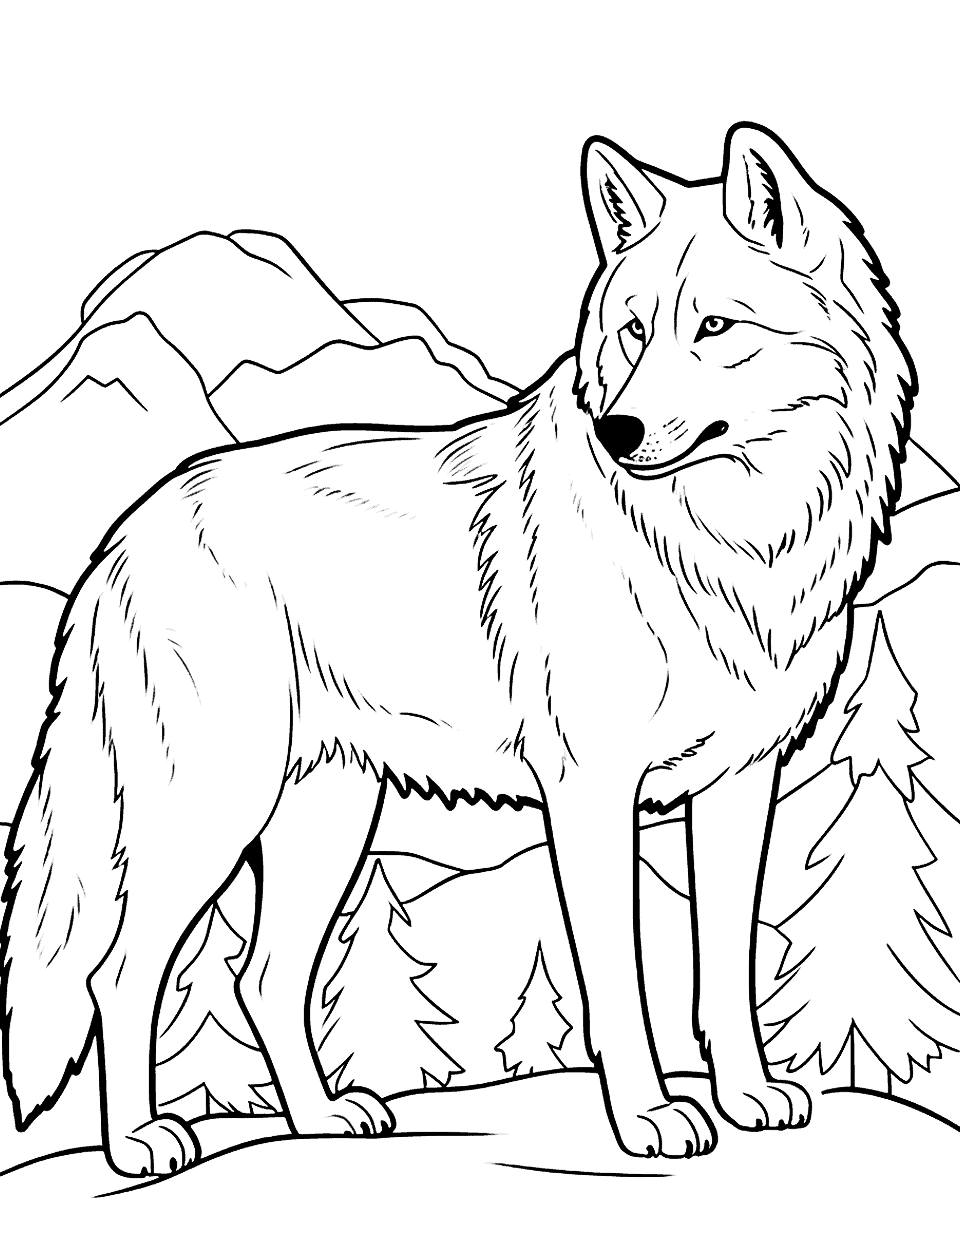 Winter's Gray Wolf Coloring Page - A gray wolf against a snowy backdrop.